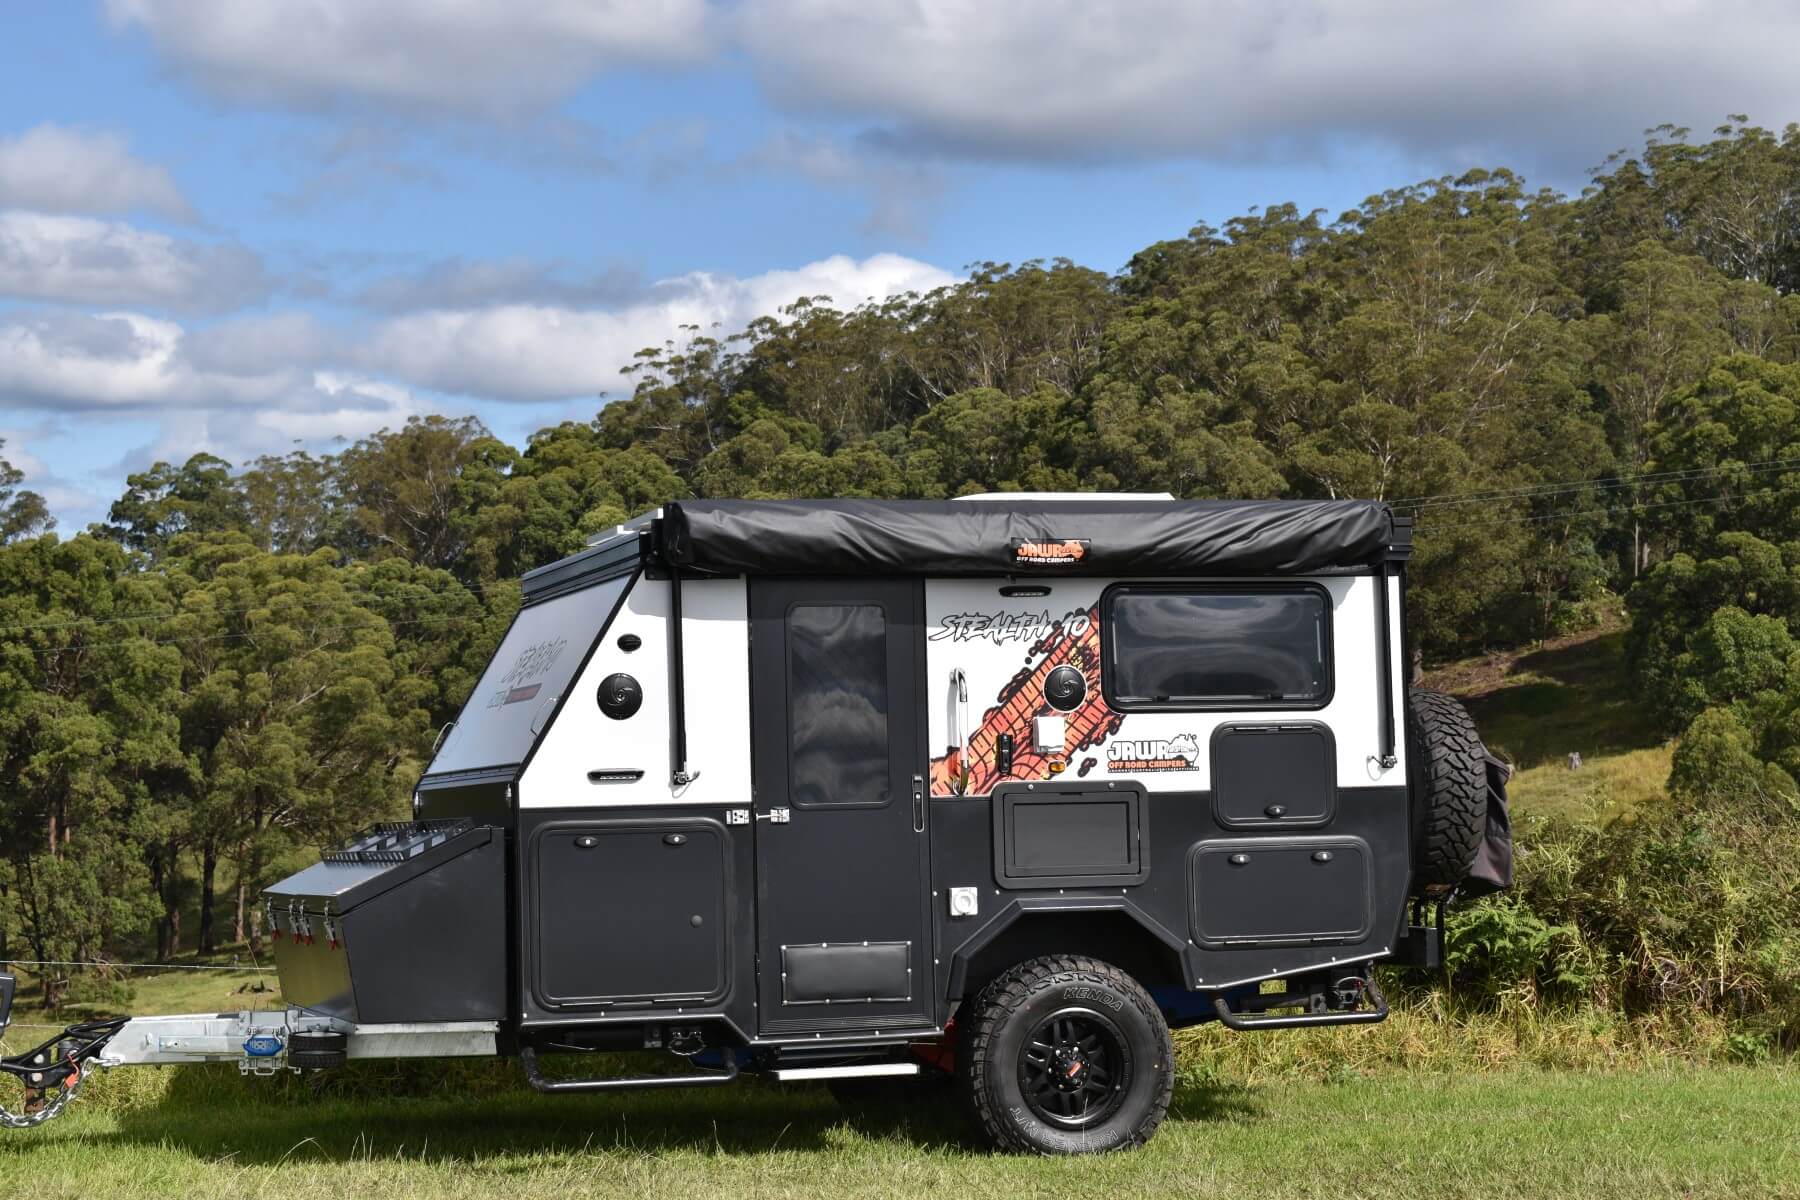 Jawa Stealth 10 hybrid compact off road camper trailer, small size camper for couples, parked on grass with hilly and bush landscape behind.